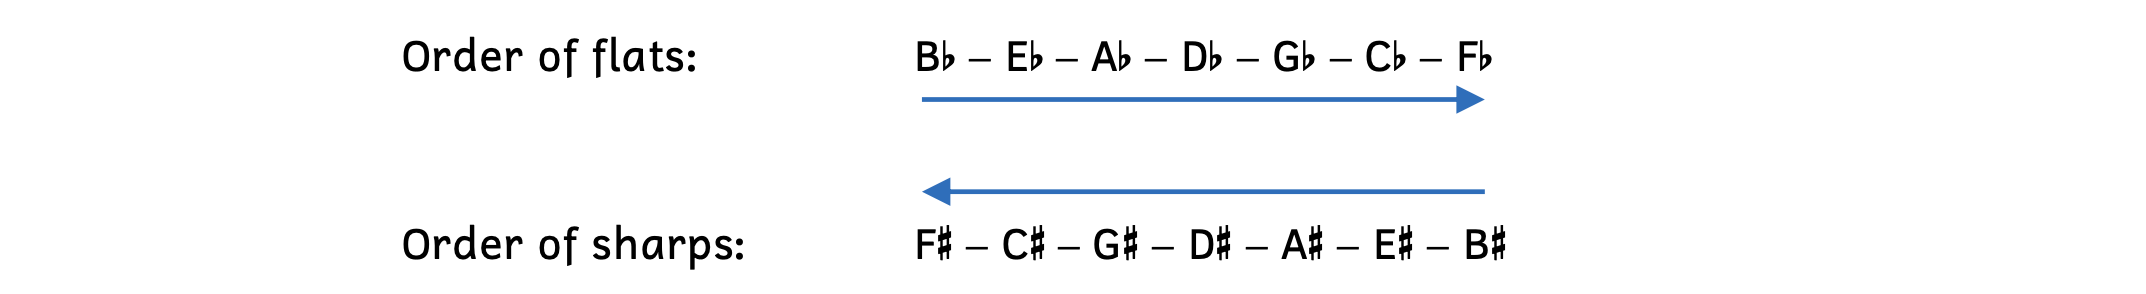 The order of sharps is the reverse of order of flats.